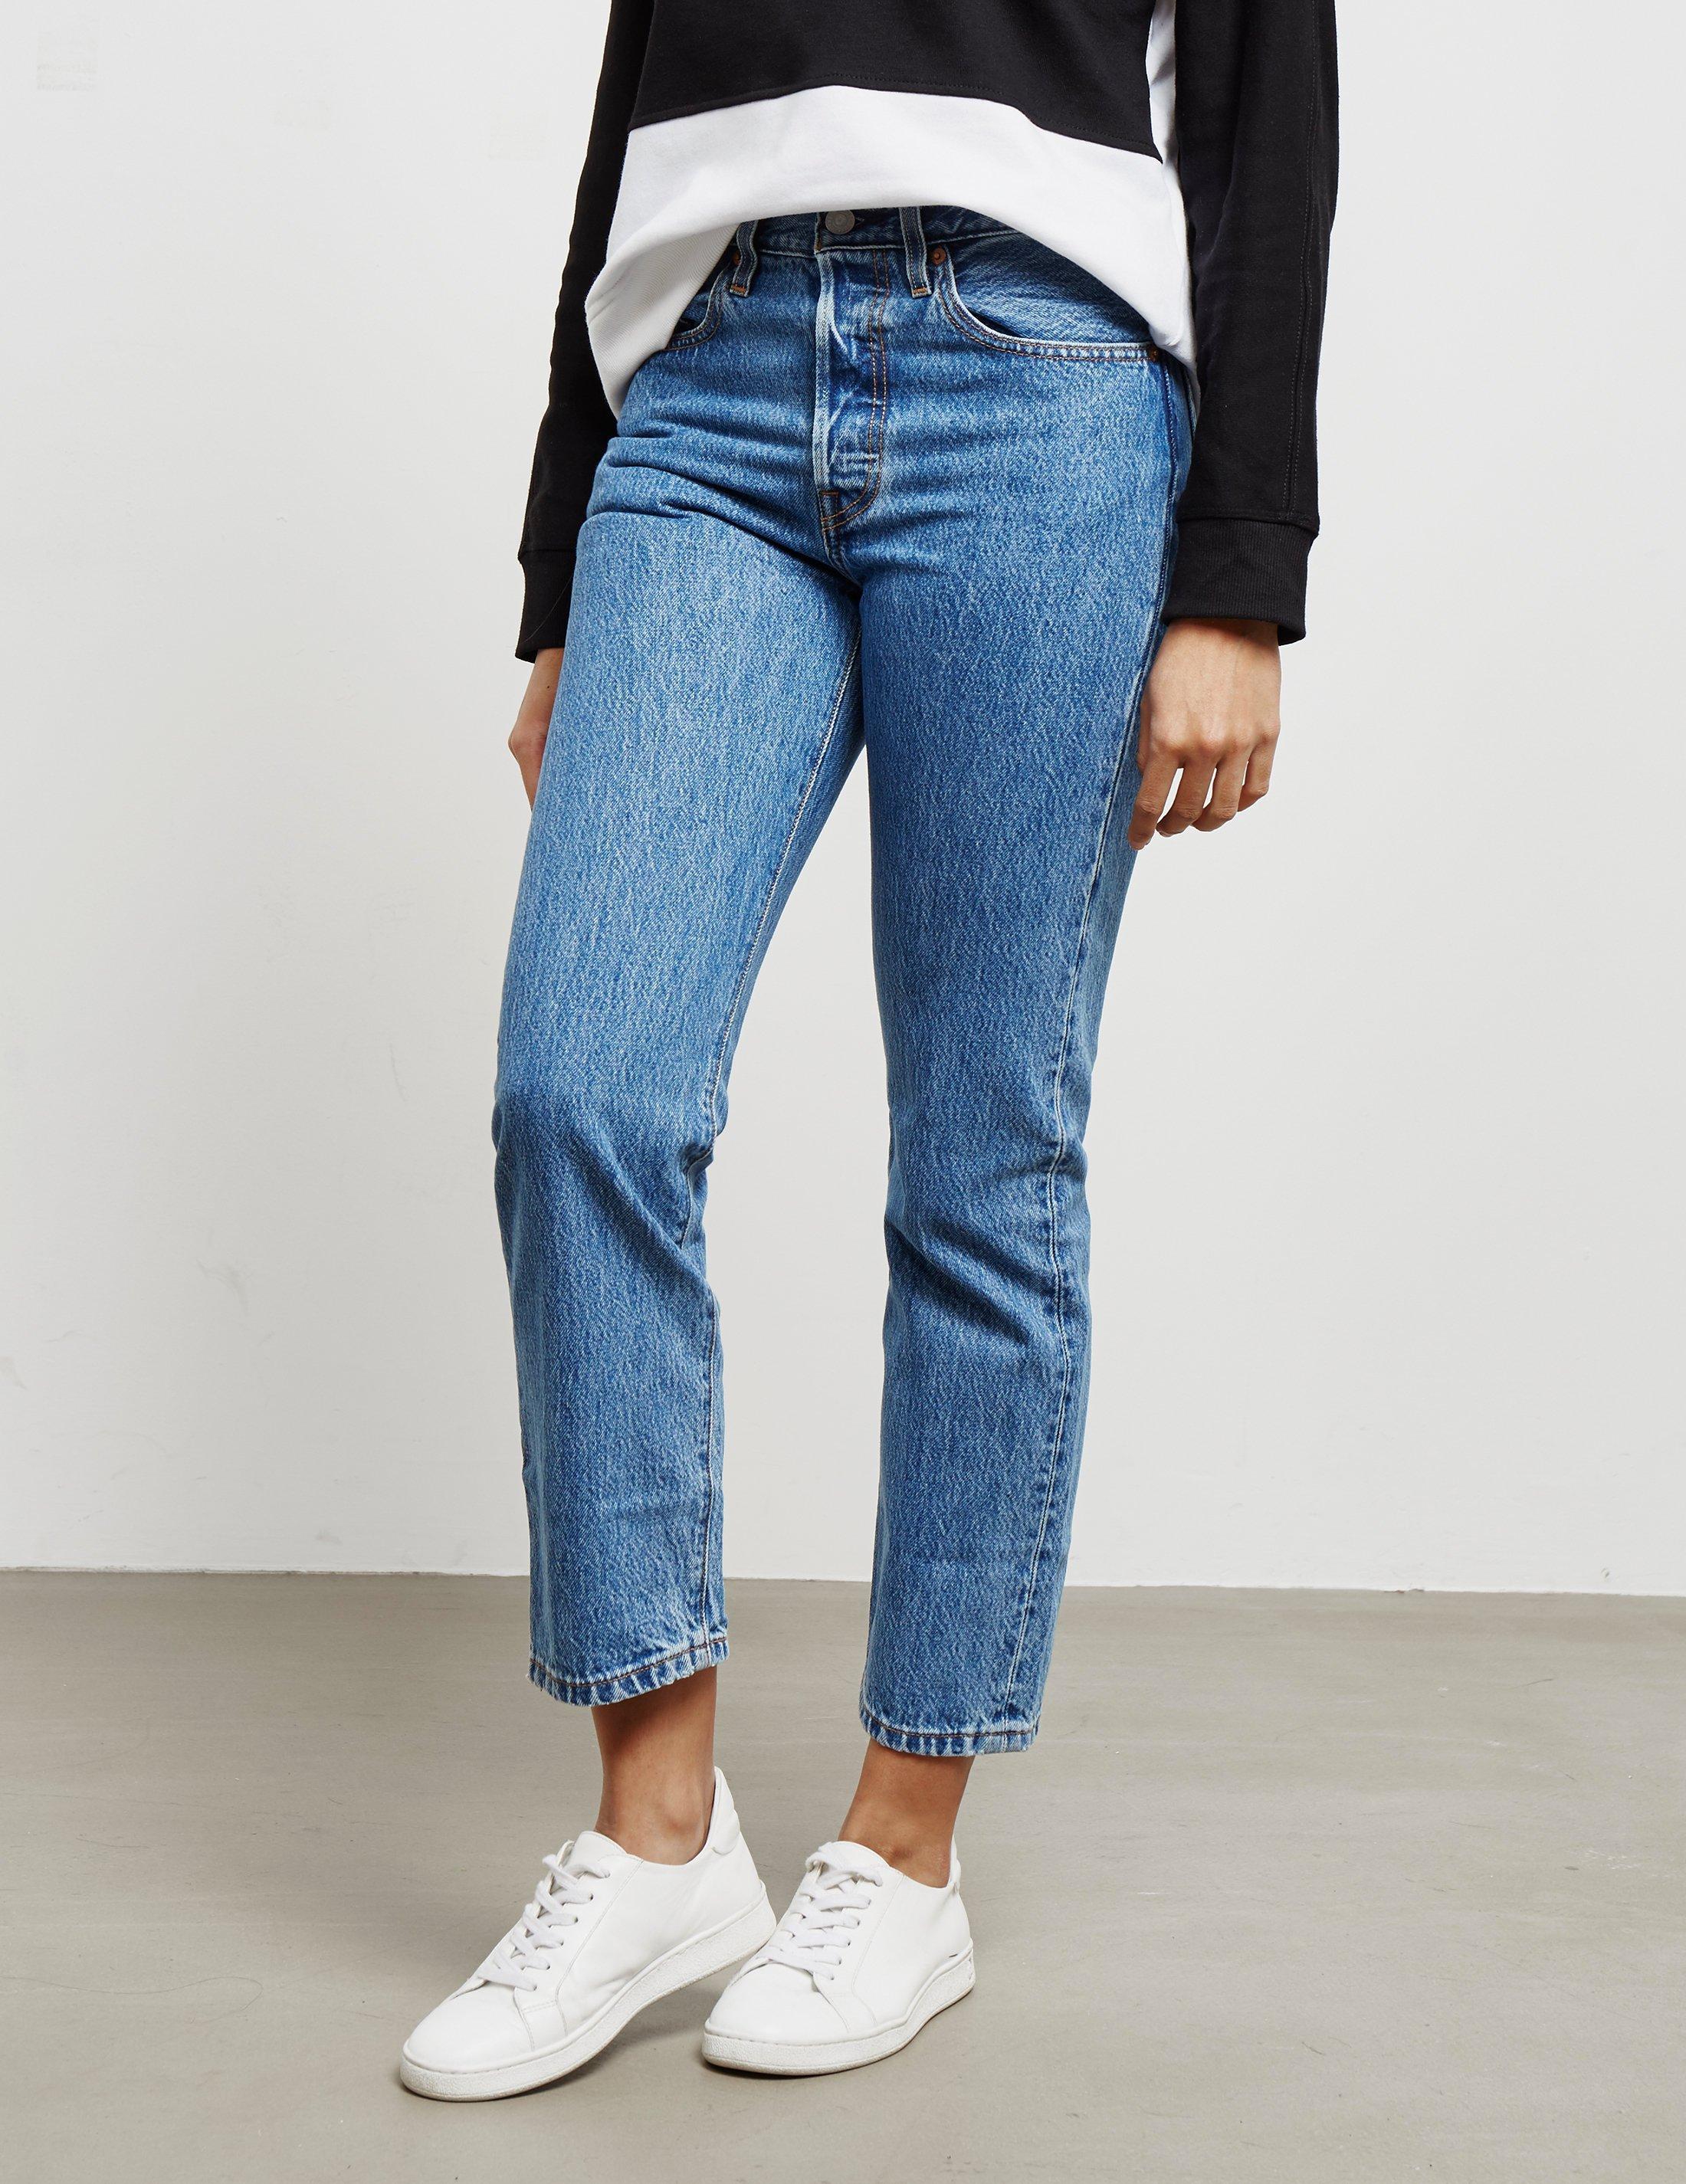 Lyst - Levi's Levis 501 Cropped Jeans Blue in Blue